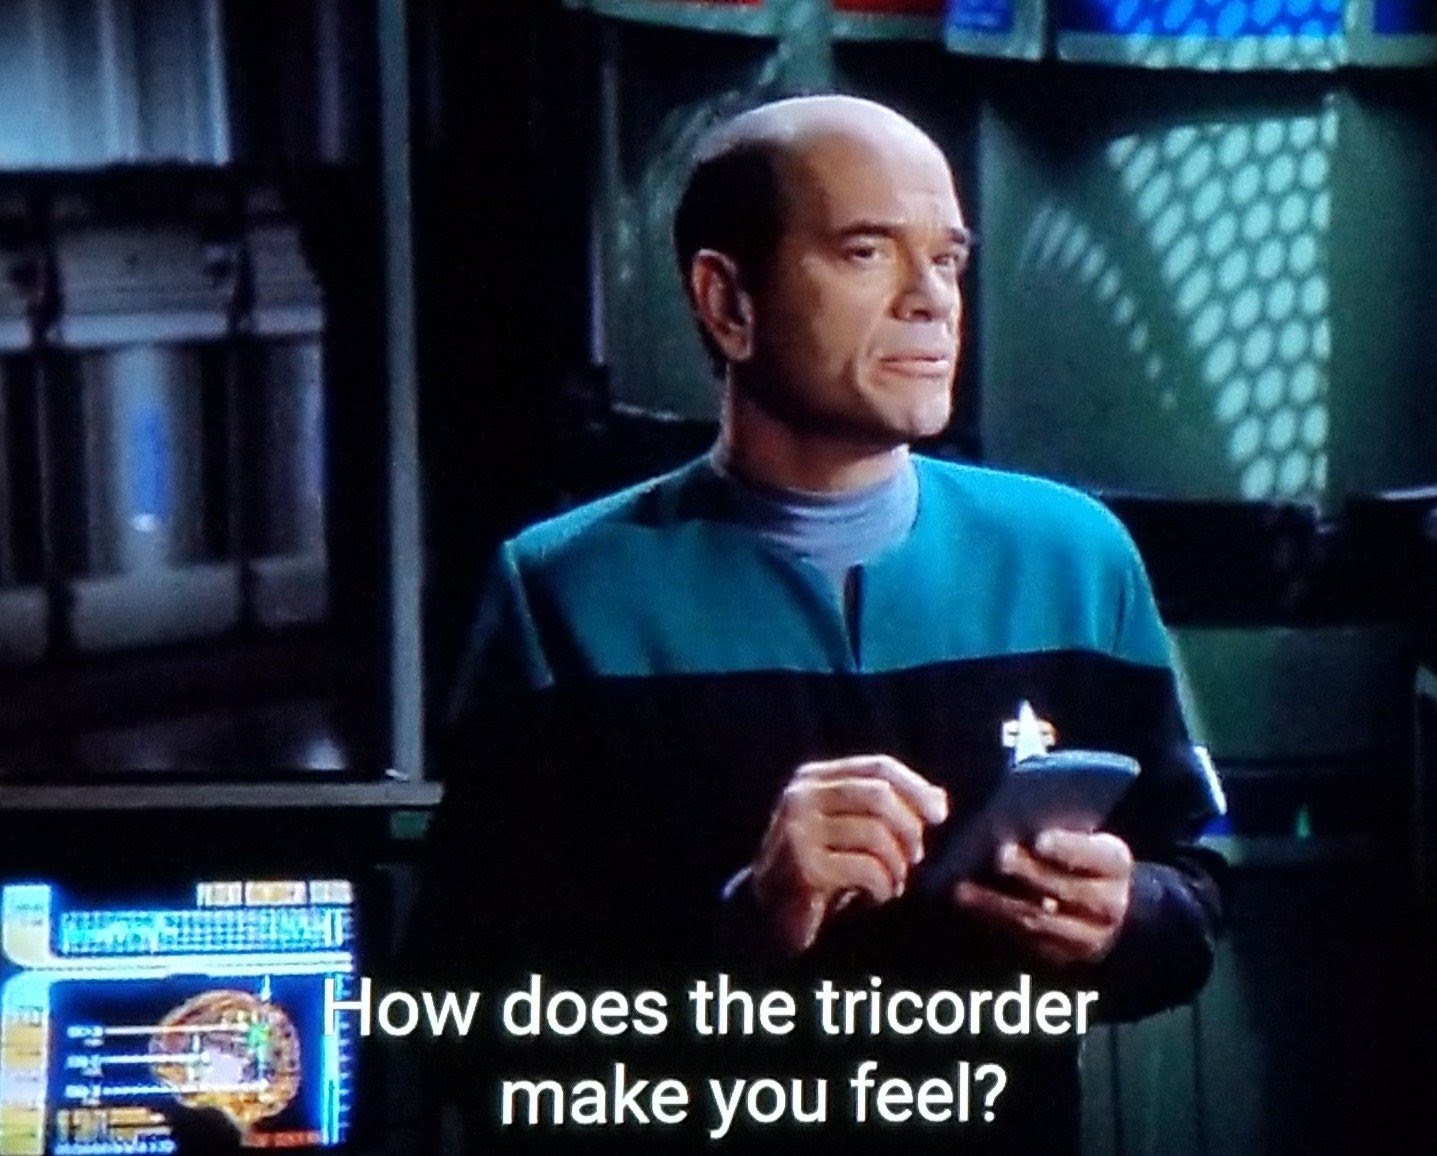 The Doctor from Star Trek: Voyager asking "how does the tricorder make you feel?"